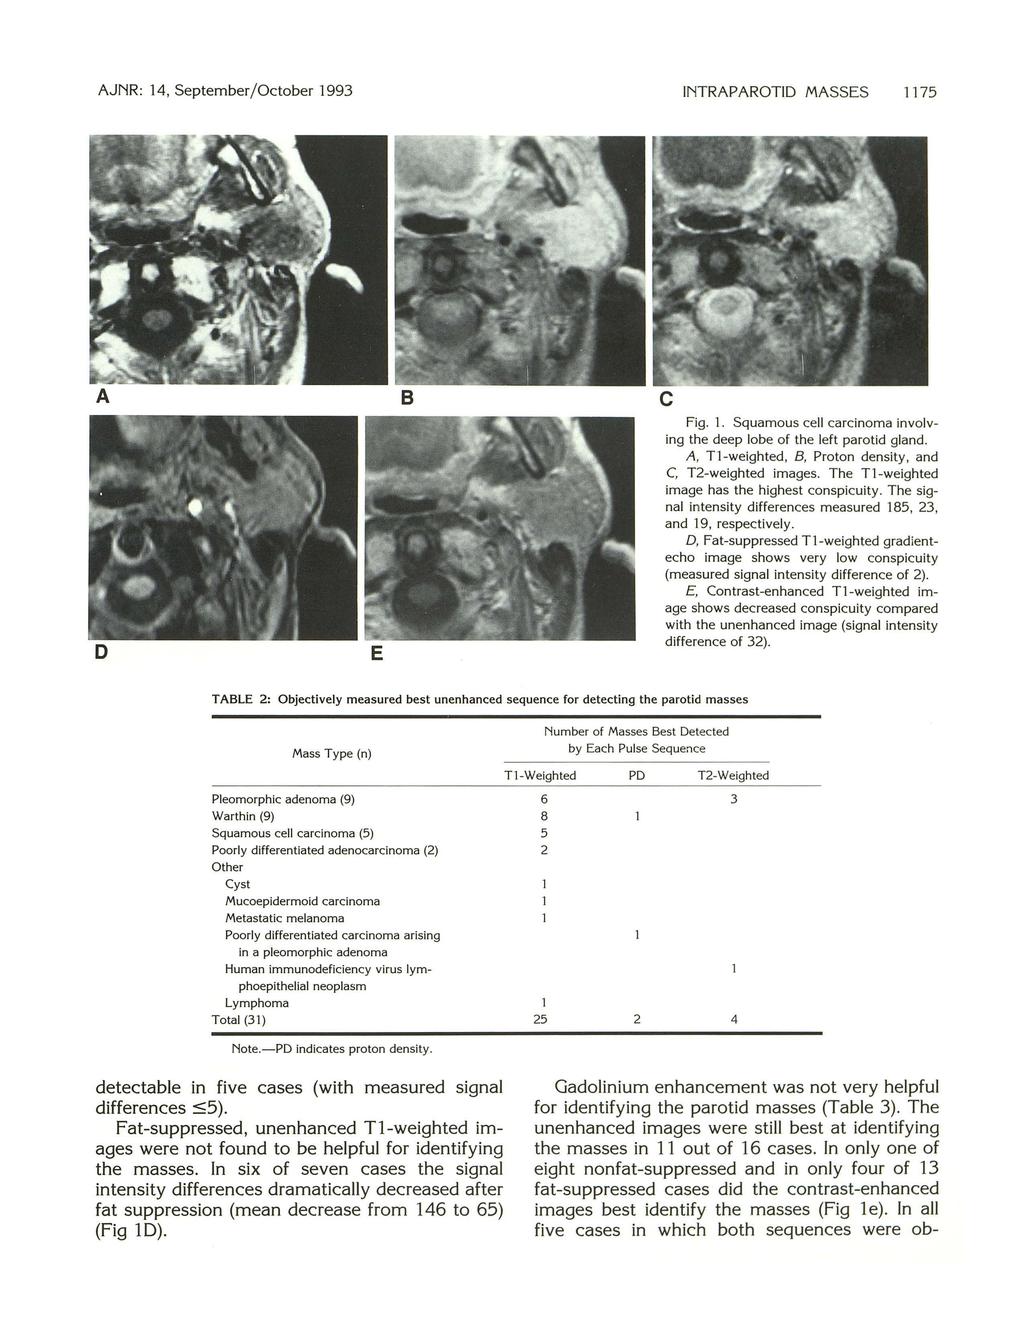 AJNR:, September/October 99 INTRAPAROTID MASSES 7 A 8 D E c Fig.. Squamous cell carcinoma involving the deep lobe of the left parotid gland. A, T-weighted, B, Proton density, and C, T-weighted images.